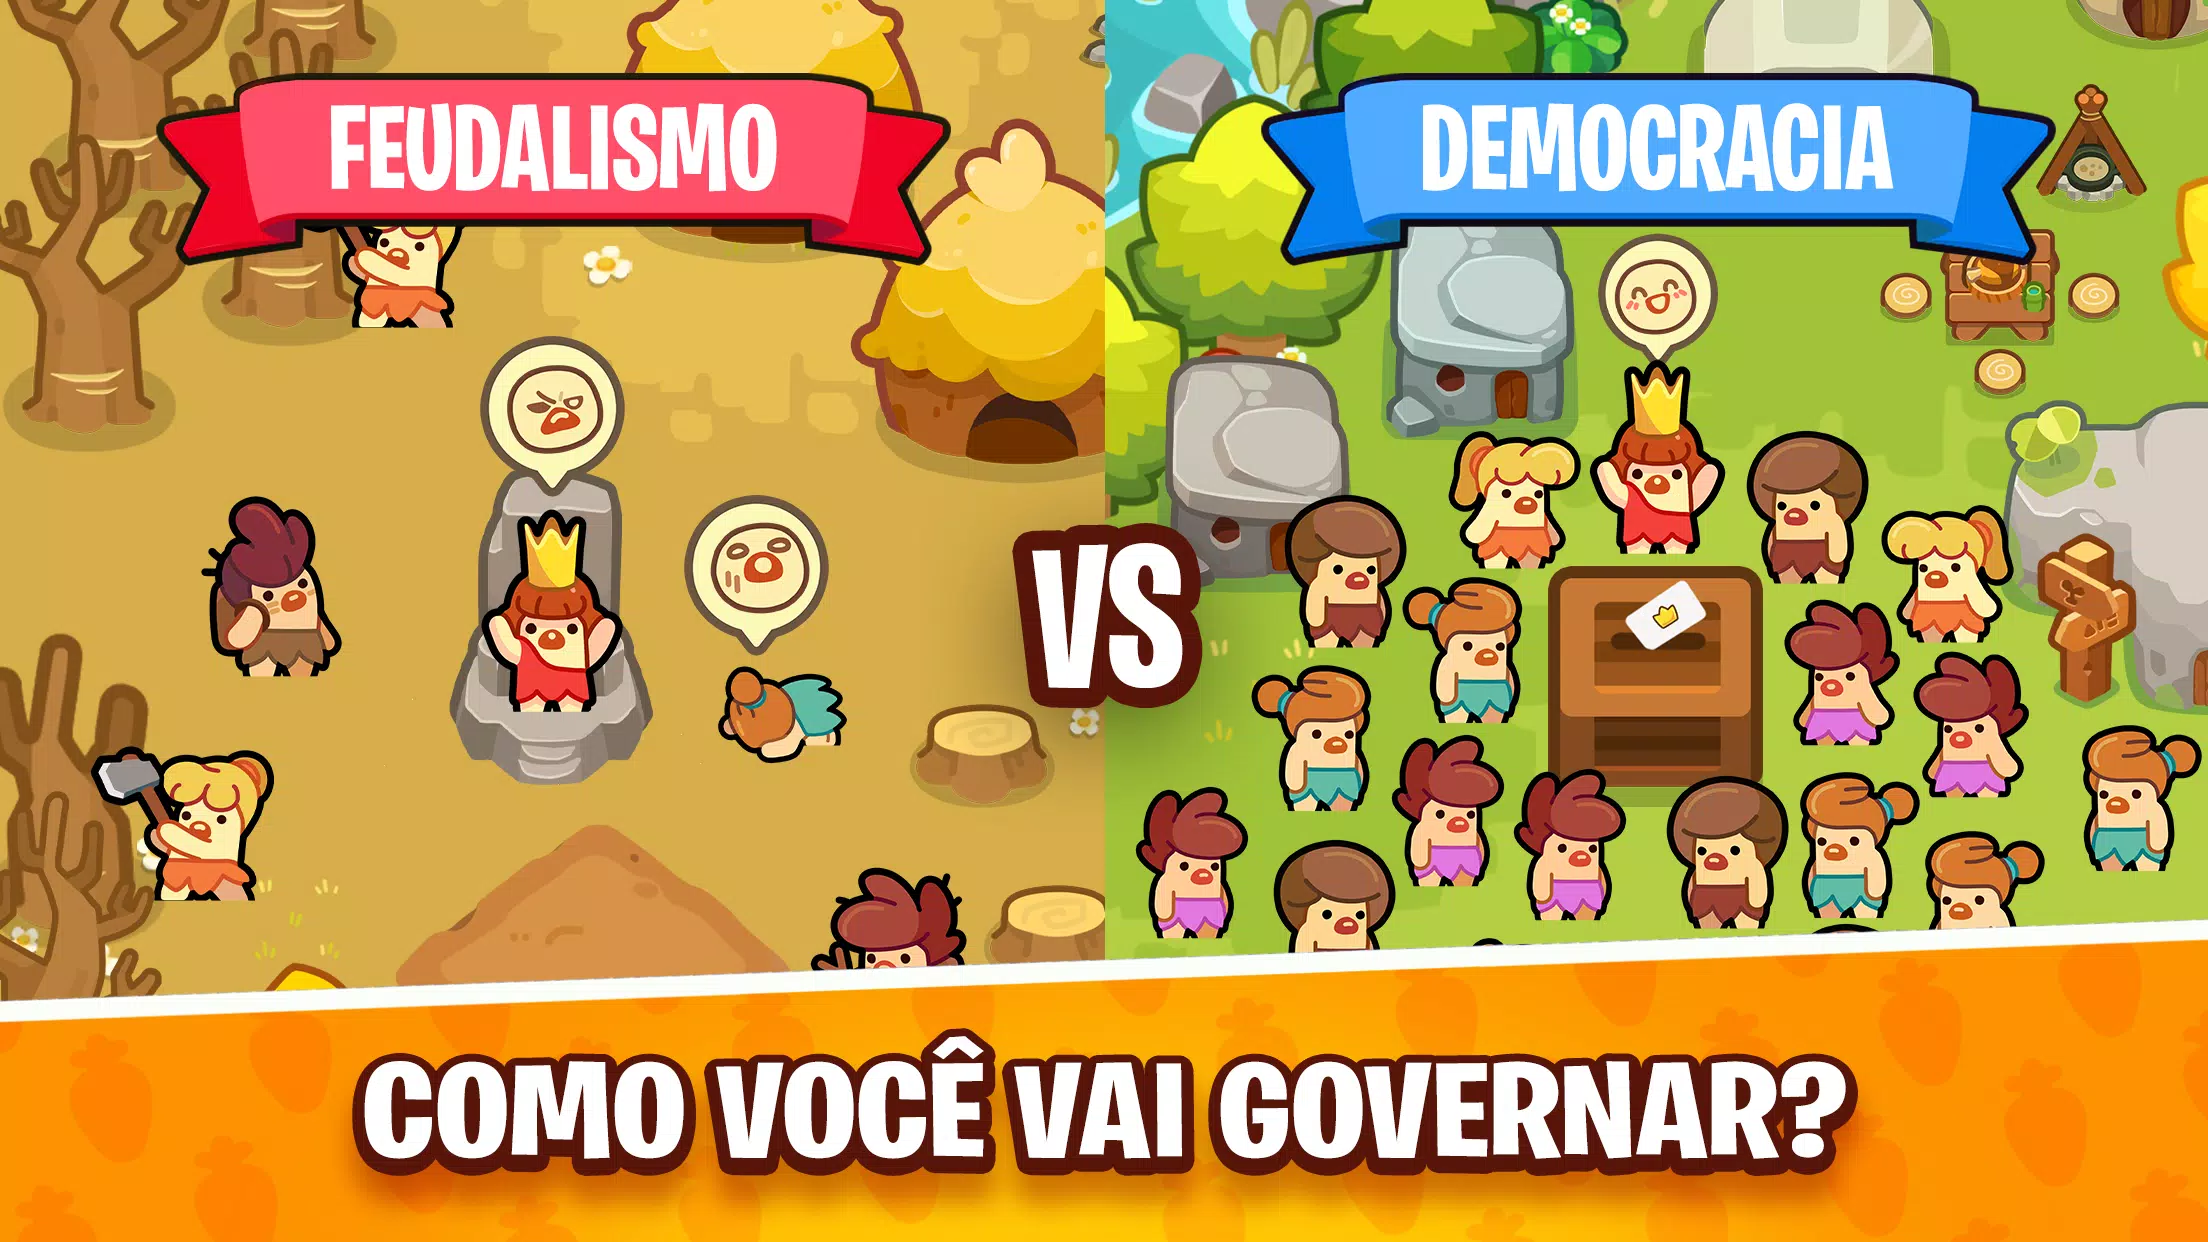 Rei dos Palpites APK for Android Download